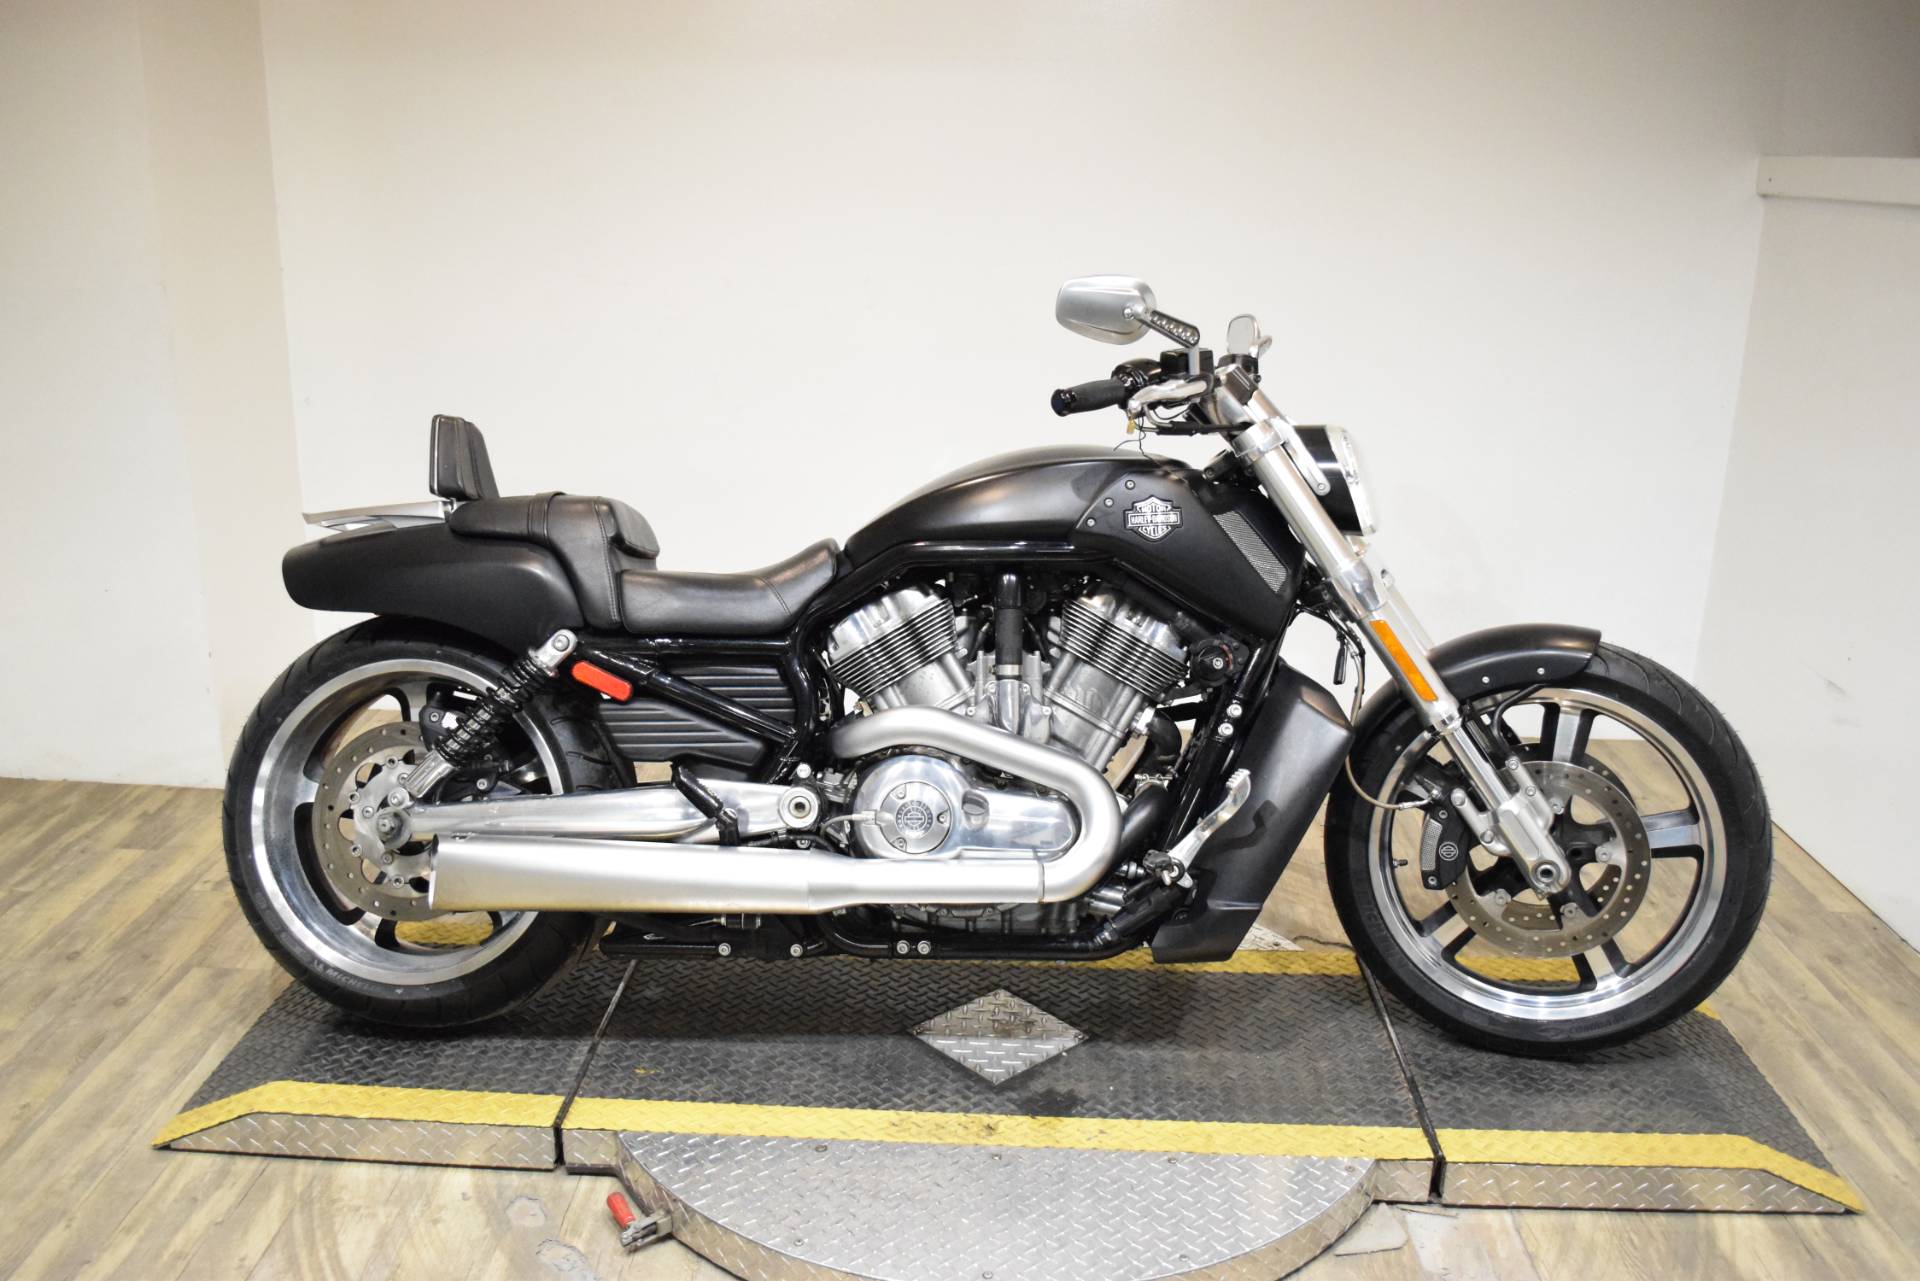 2016 Harley Davidson V Rod Muscle Used Motorcycle For Sale Wauconda Illinois